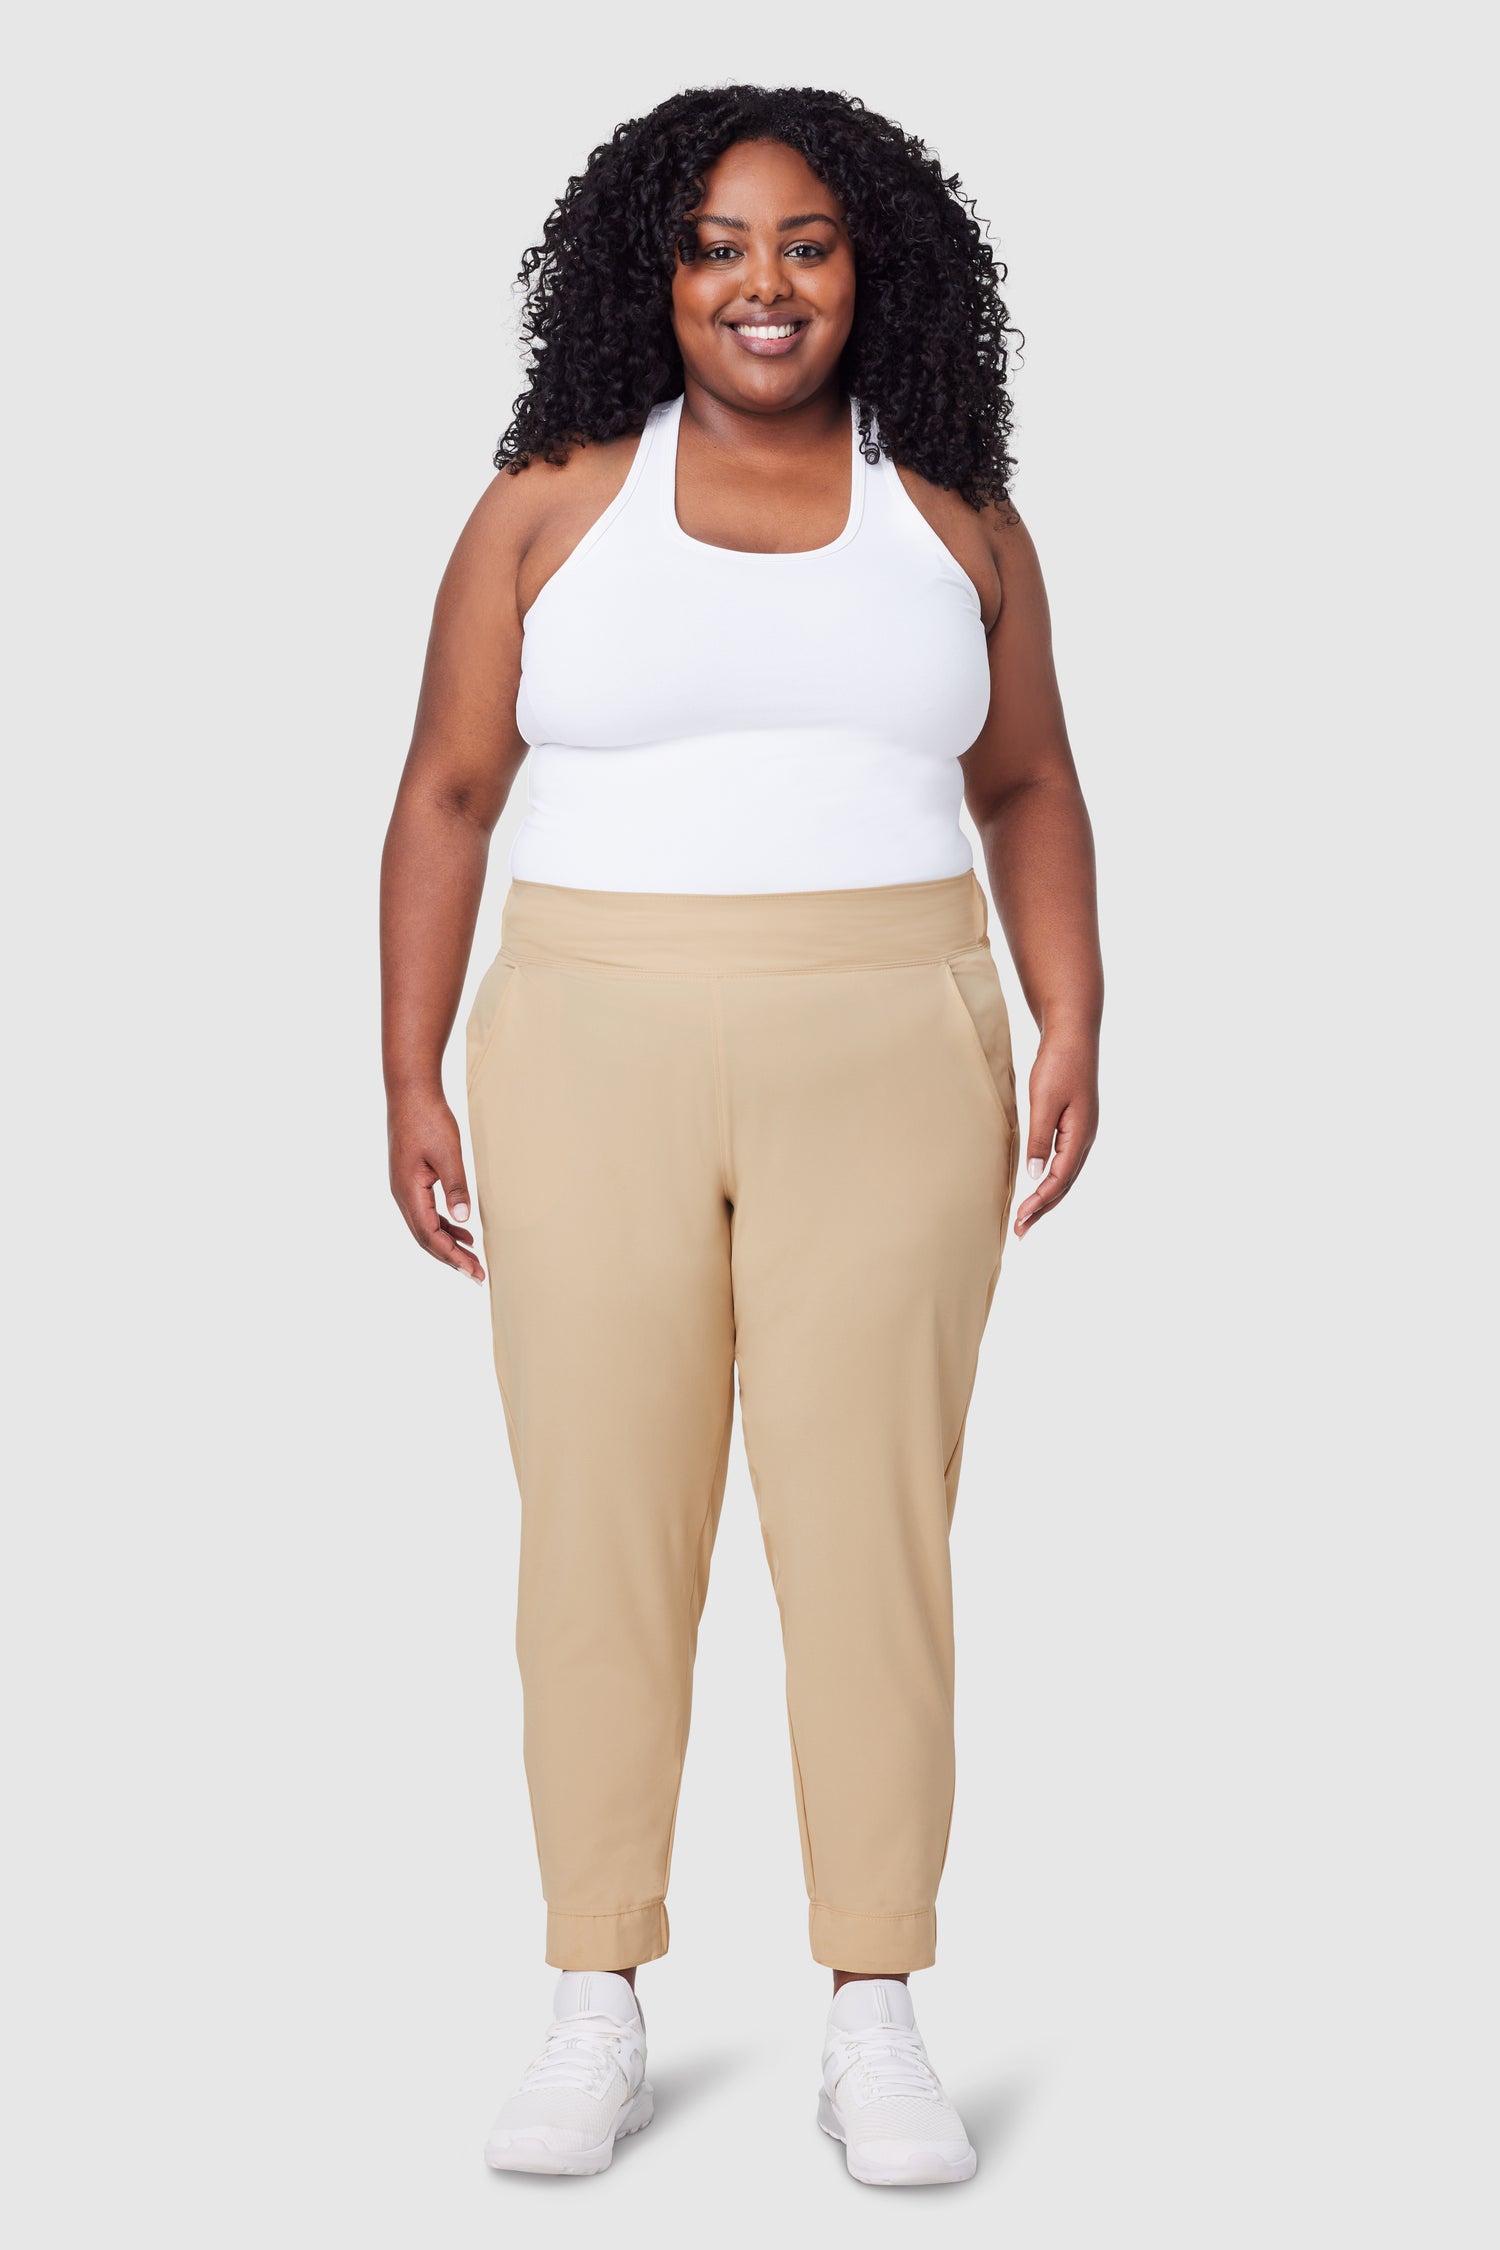 FWD Women's Core Stretch Woven Pant